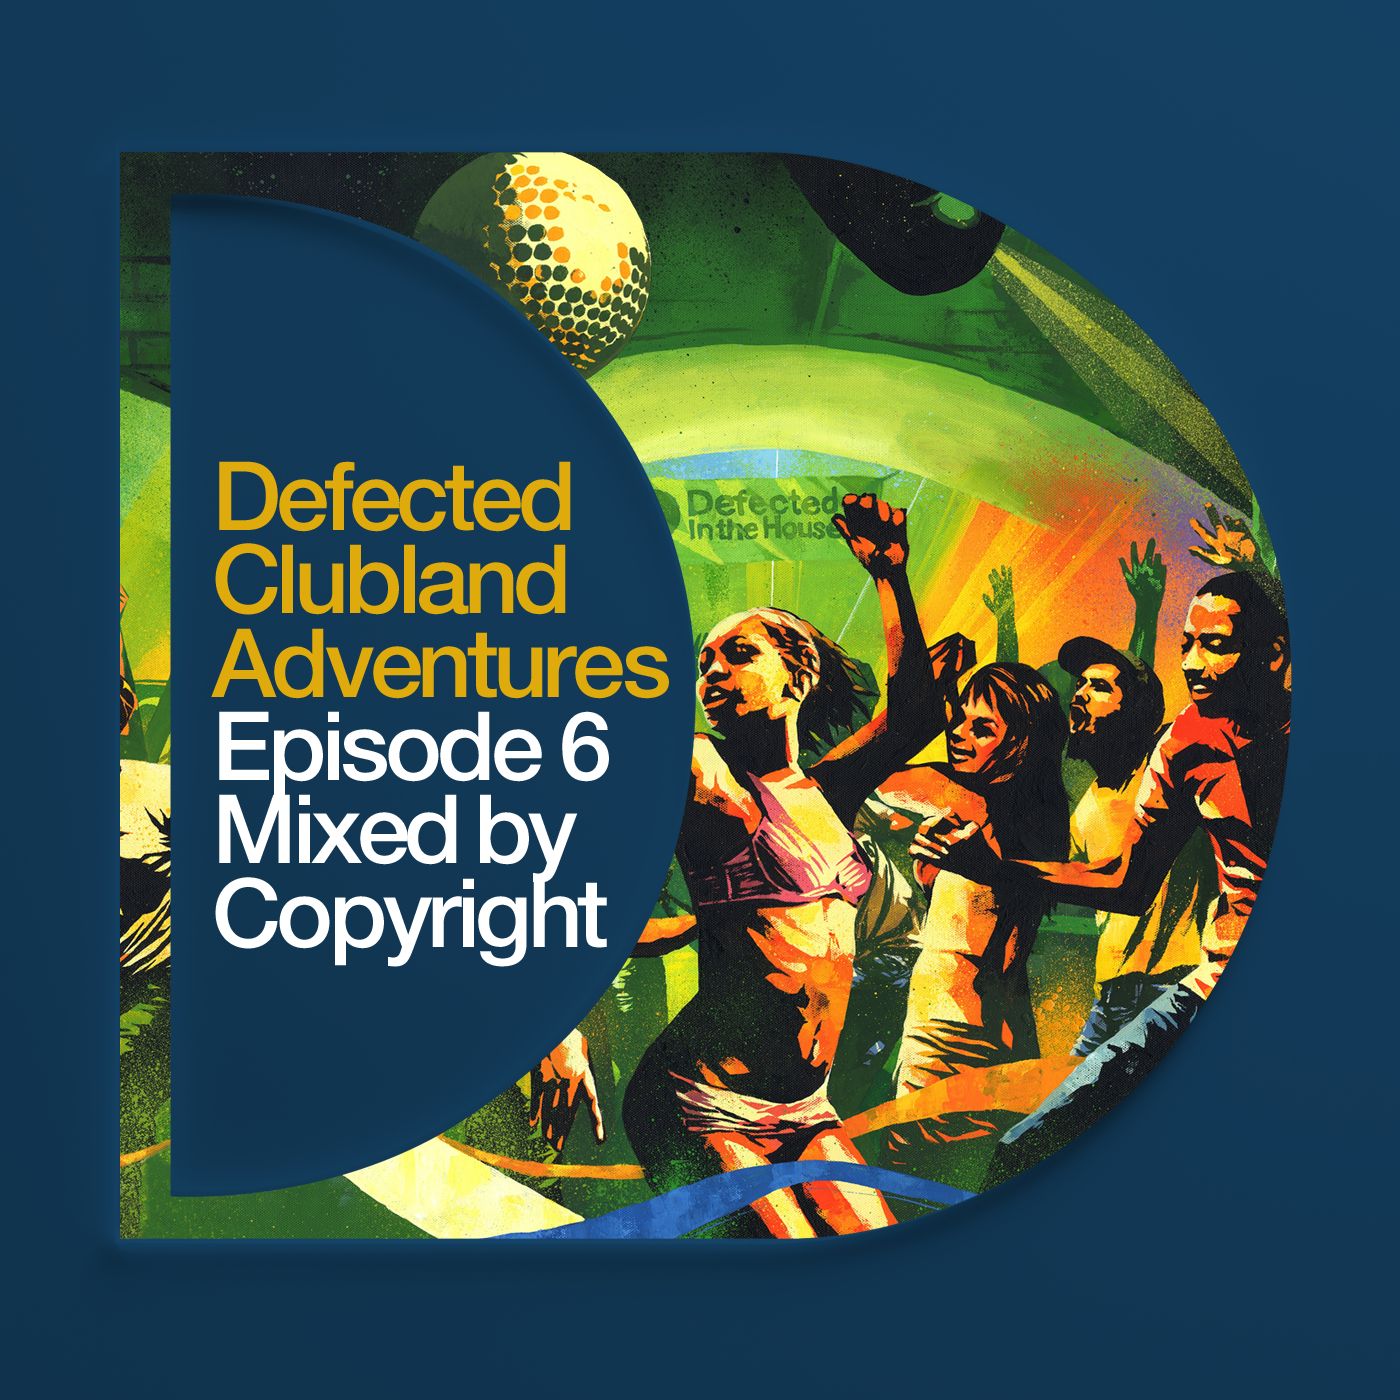 Defected Clubland Adventures Episode 6 - Mixed by Copyright